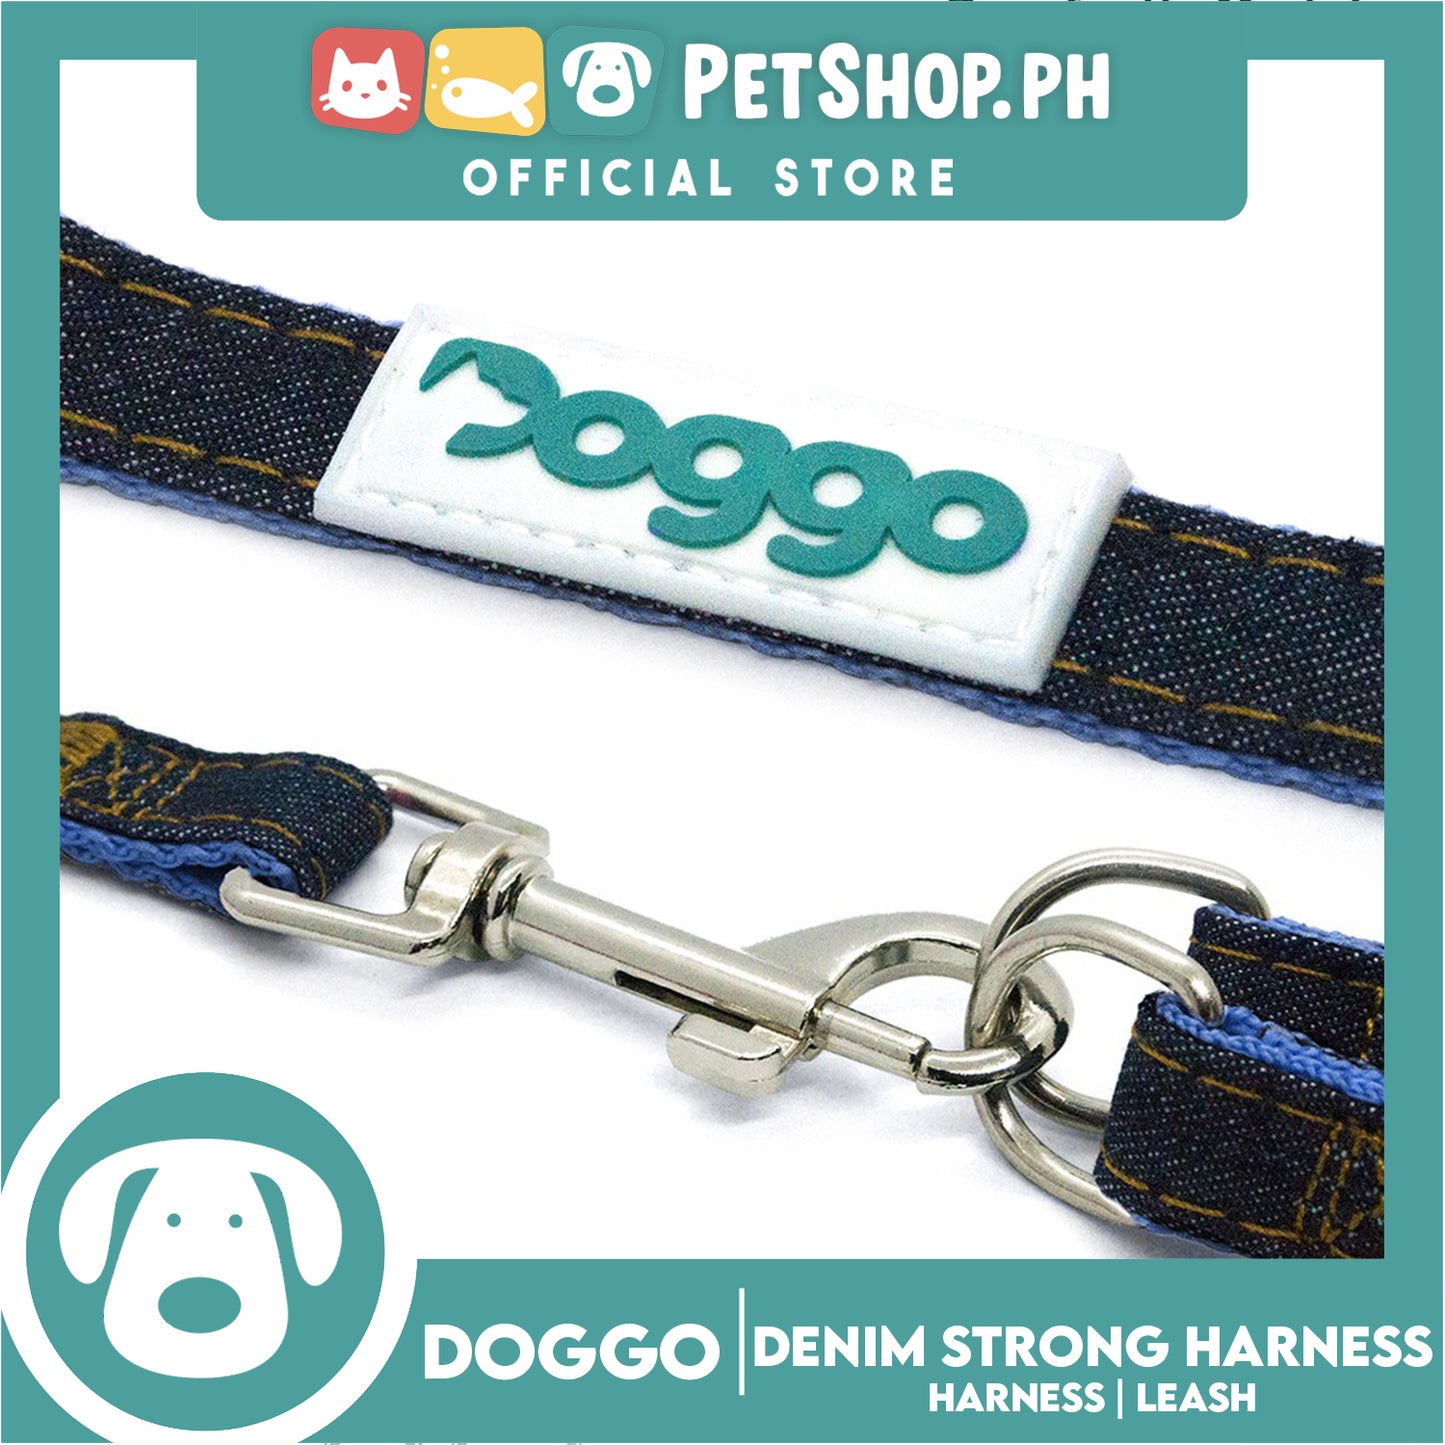 Doggo Denim Strong Harness Large (Black) Thick Leash and Straps for Your Dog